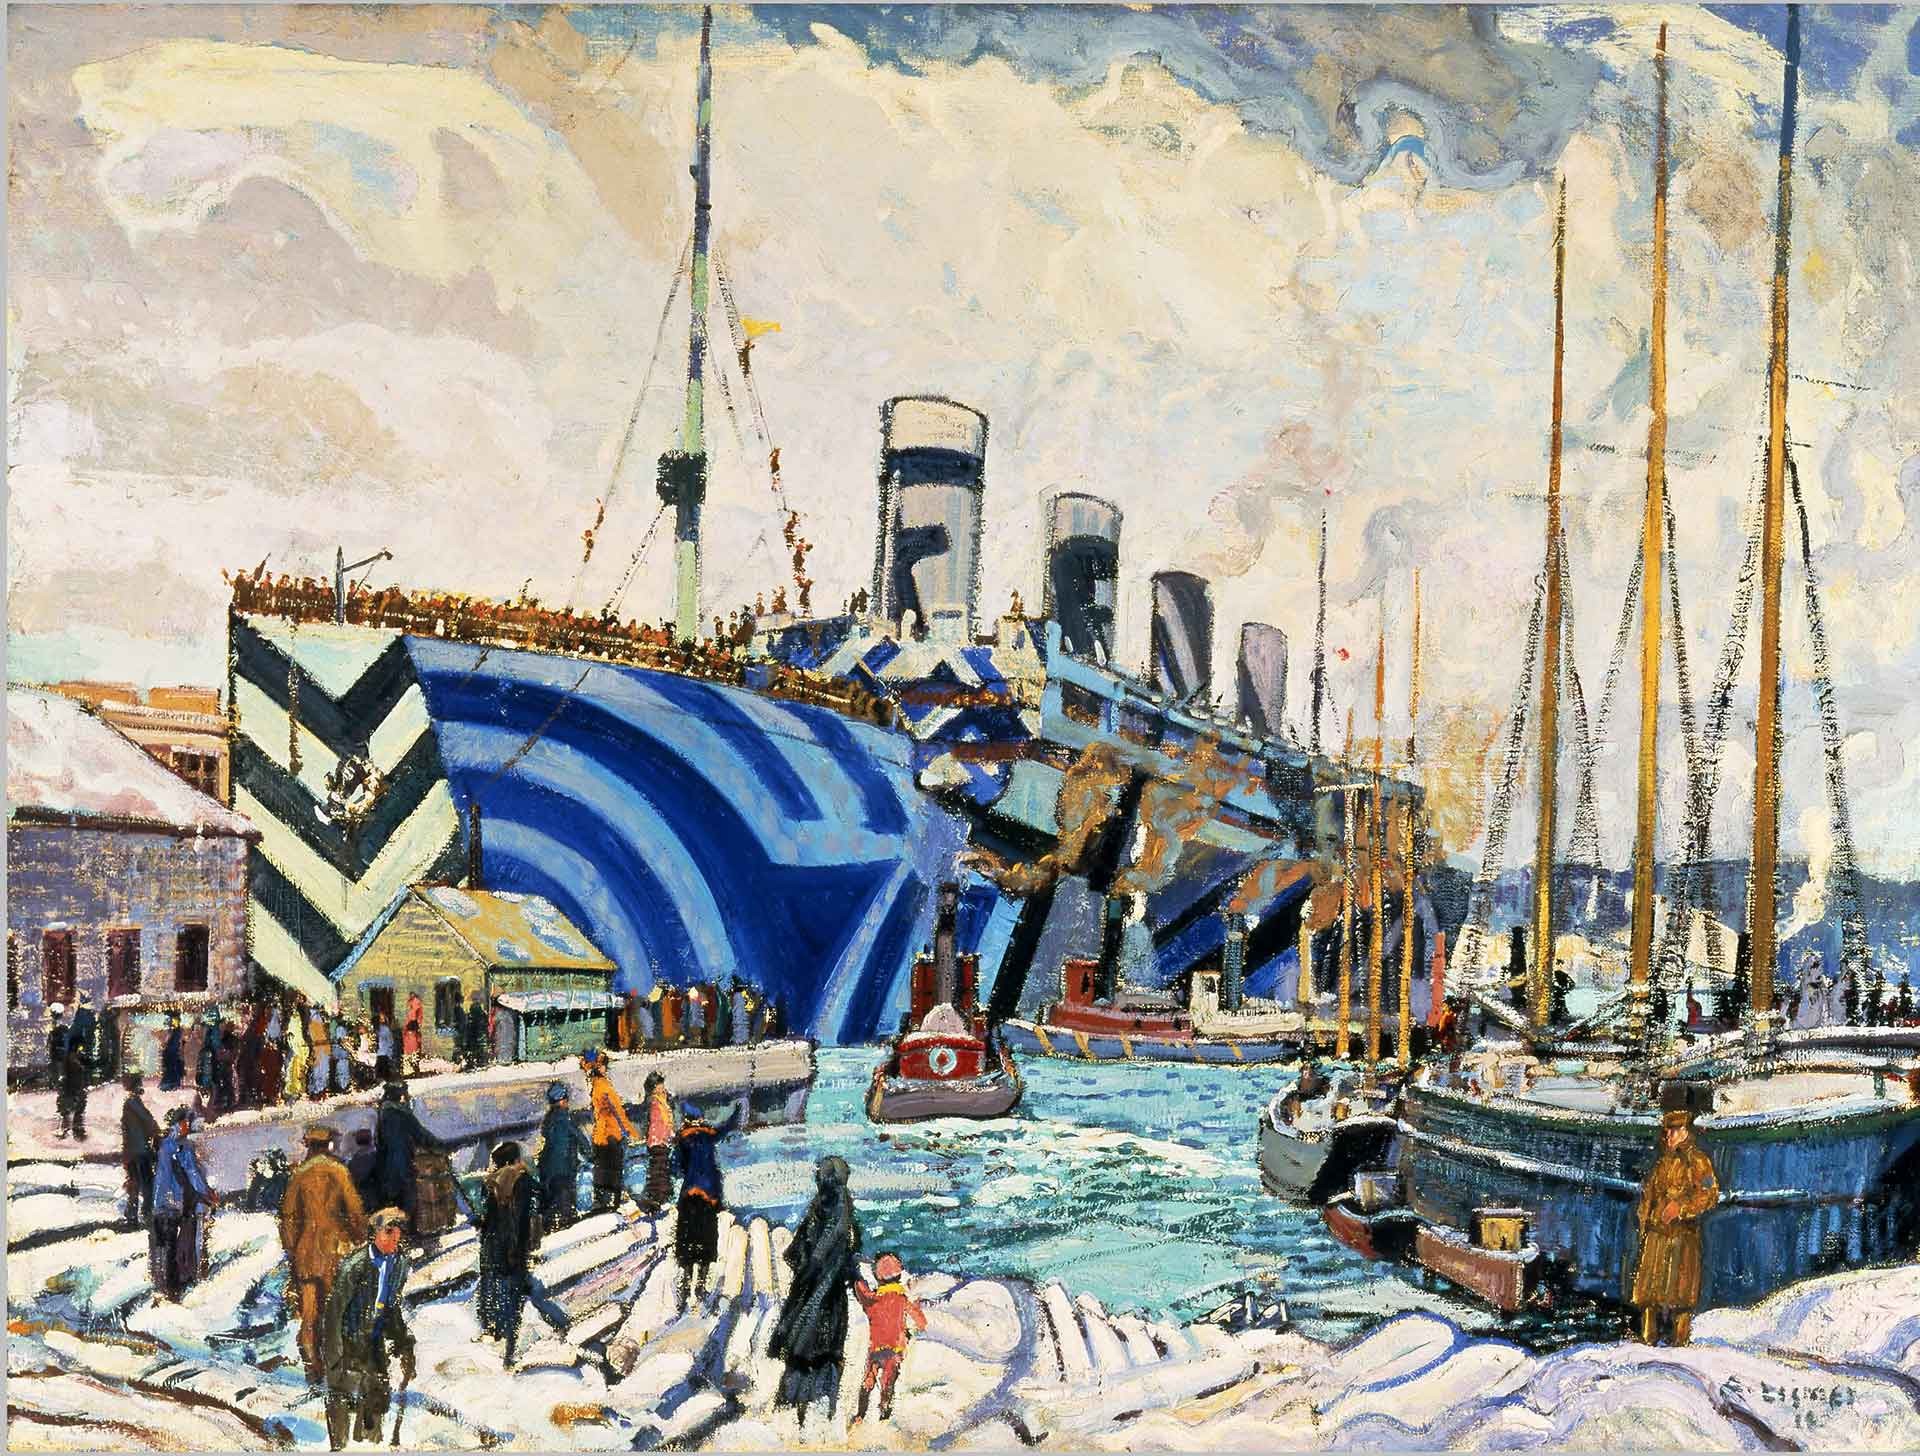 100 years strong: remembering Arthur Lismer and the Group of Seven